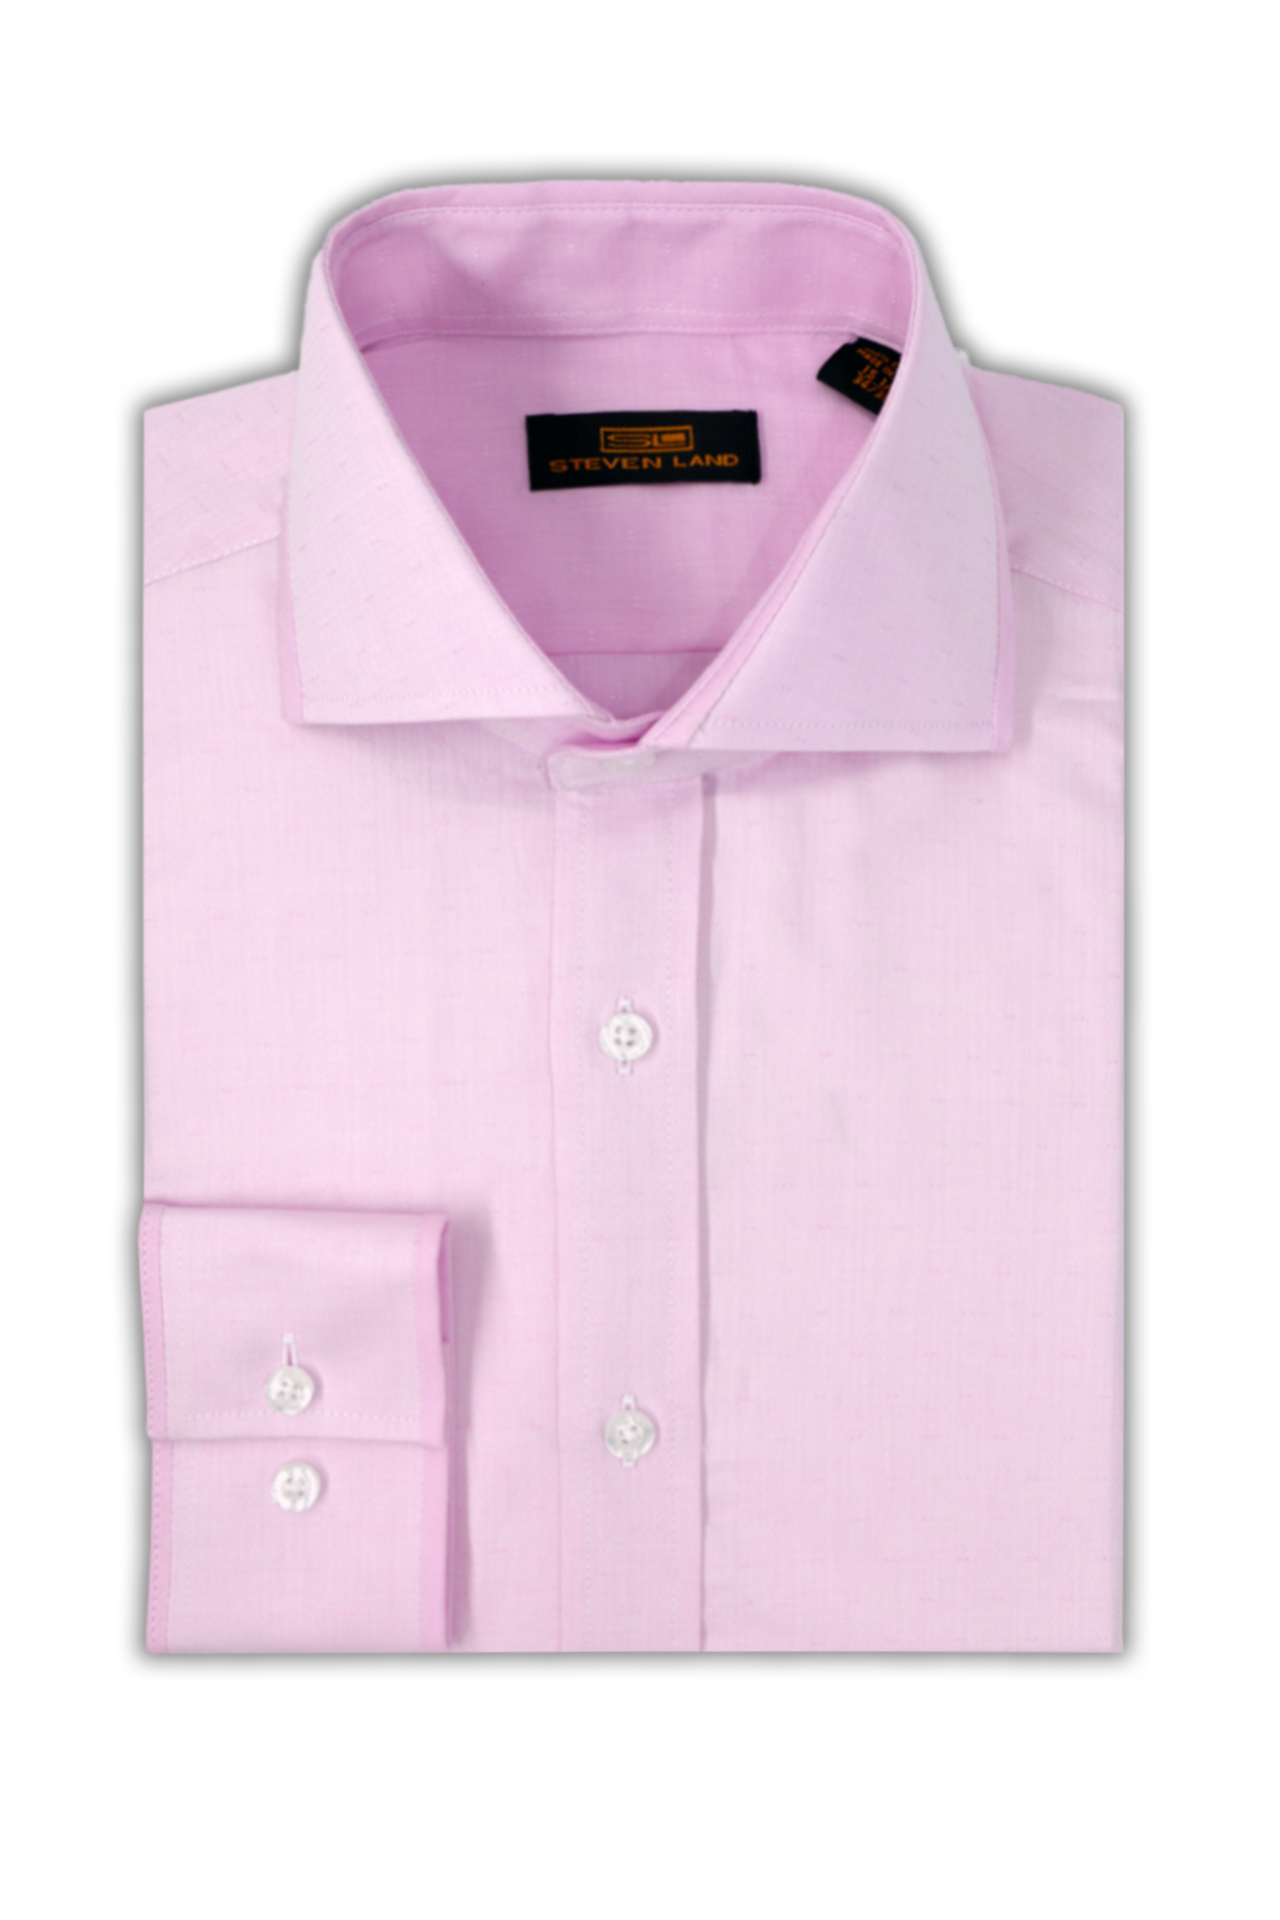 Steven Land Dress Shirt | Piccadilly | Spread Collar | Button Placket ...